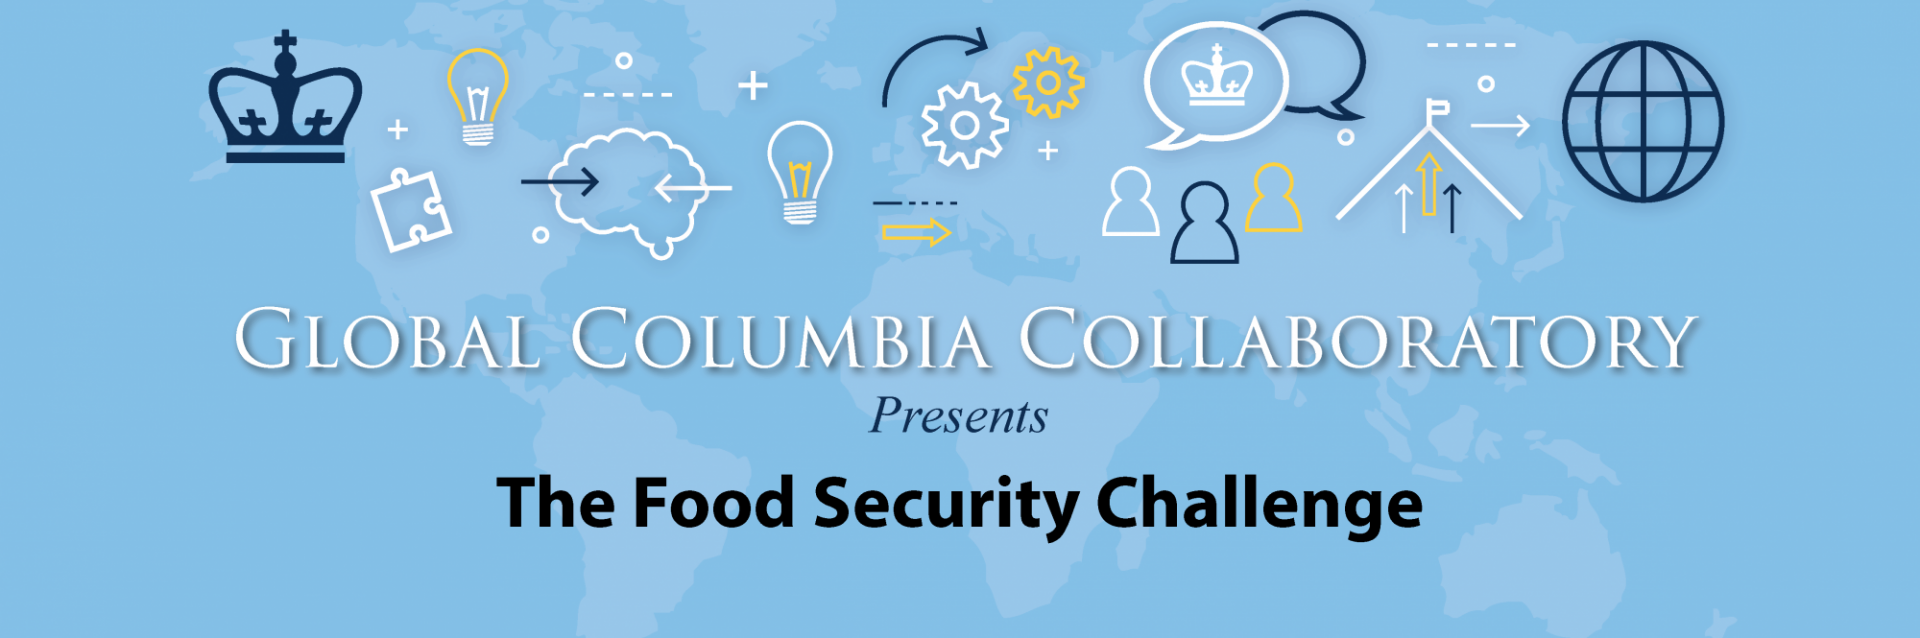 The Food Security Challenge